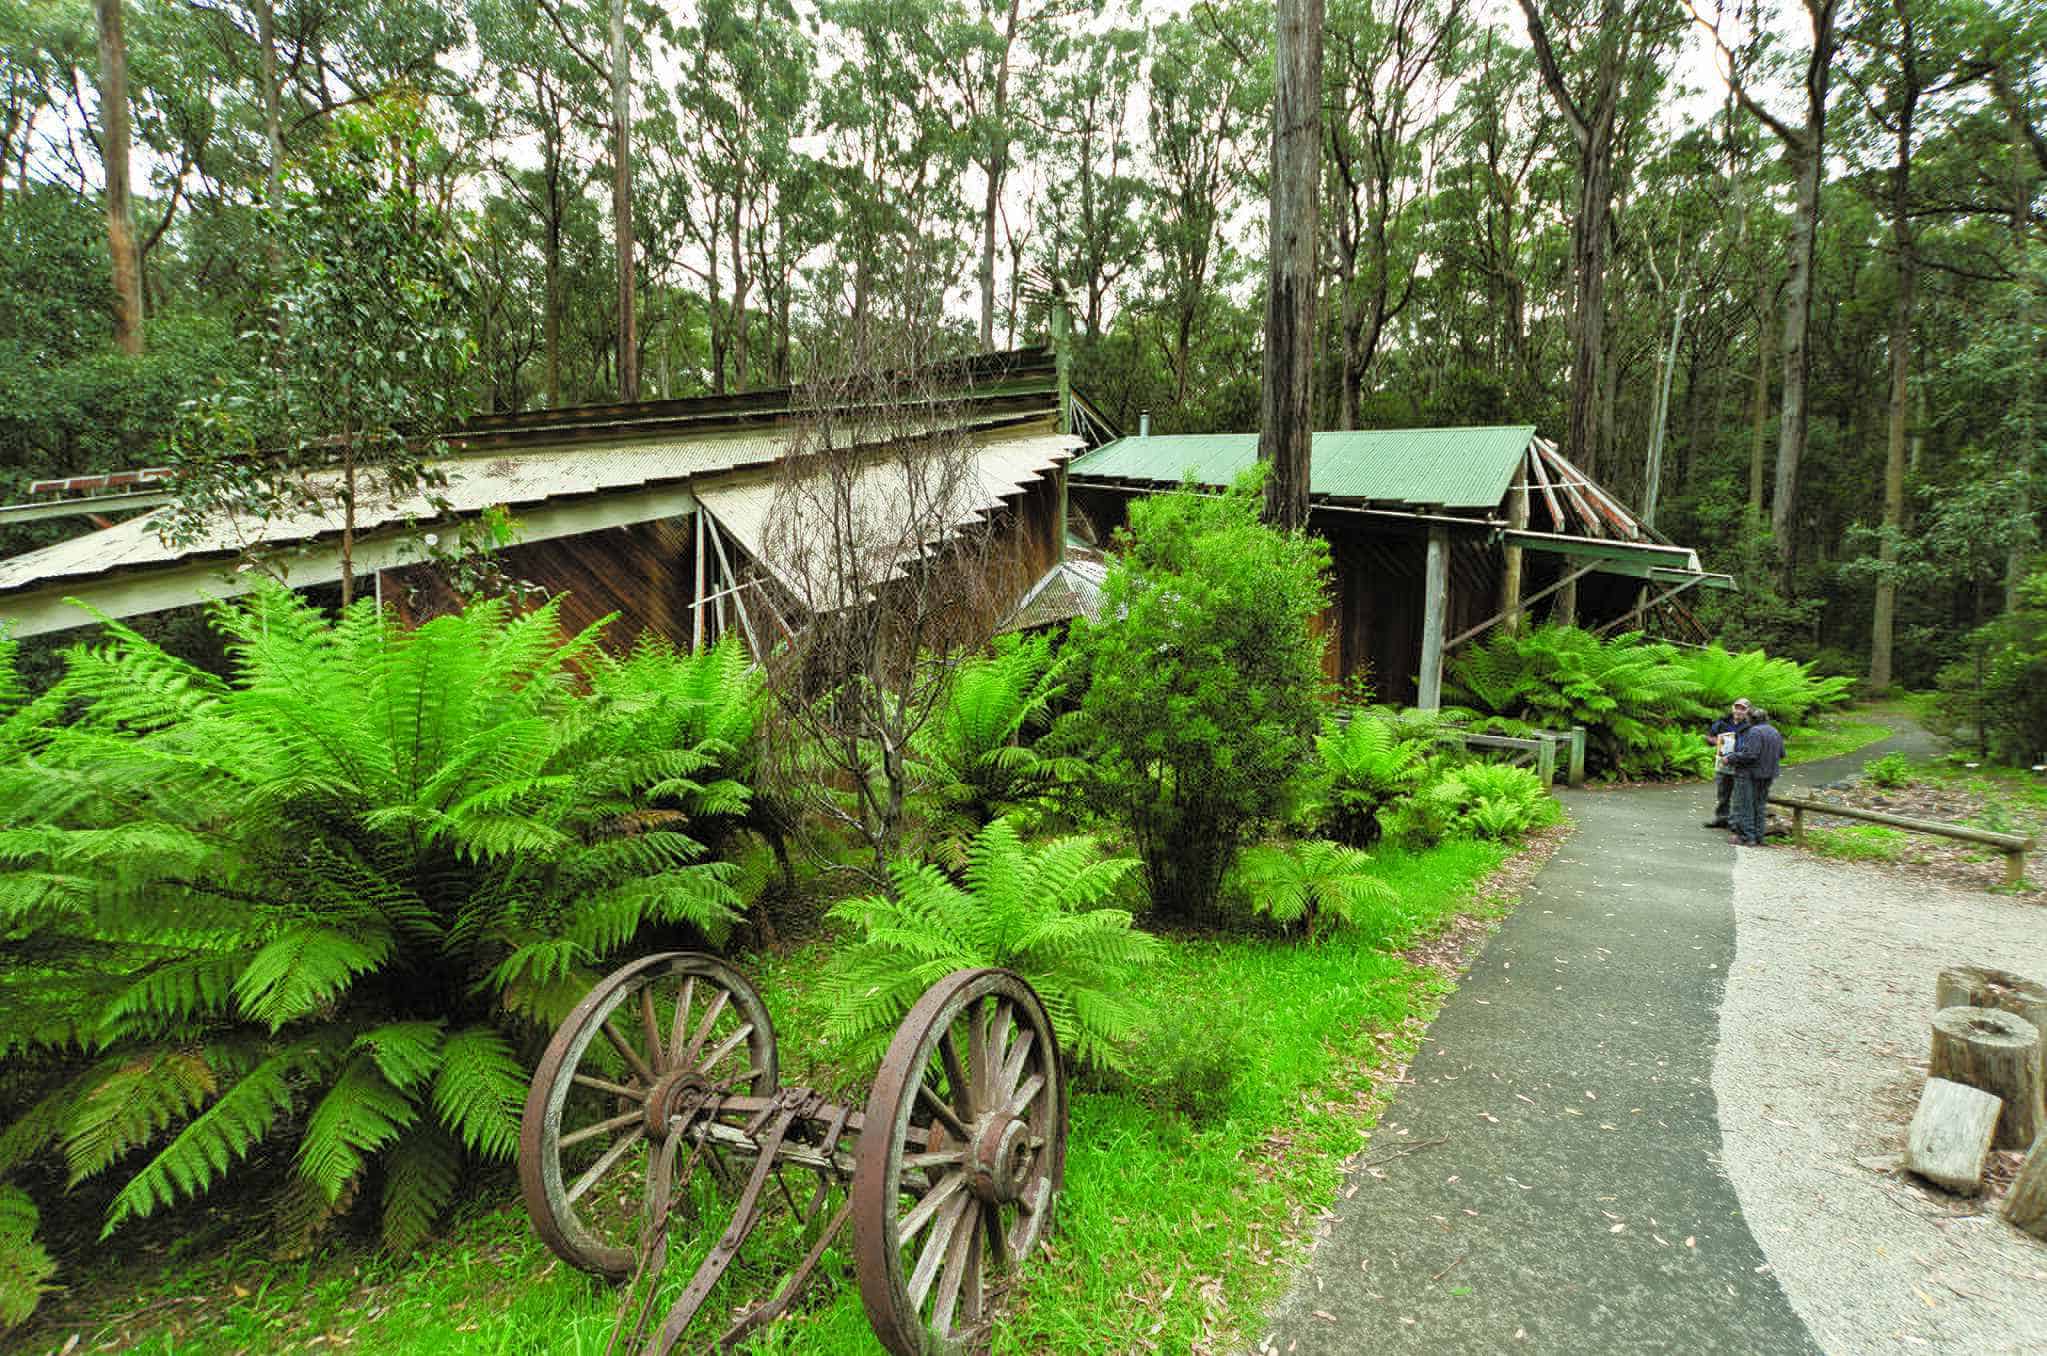 The Toolangi Forest Discovery Centre as it looked in 2011, prior to it falling into a state of disrepair.